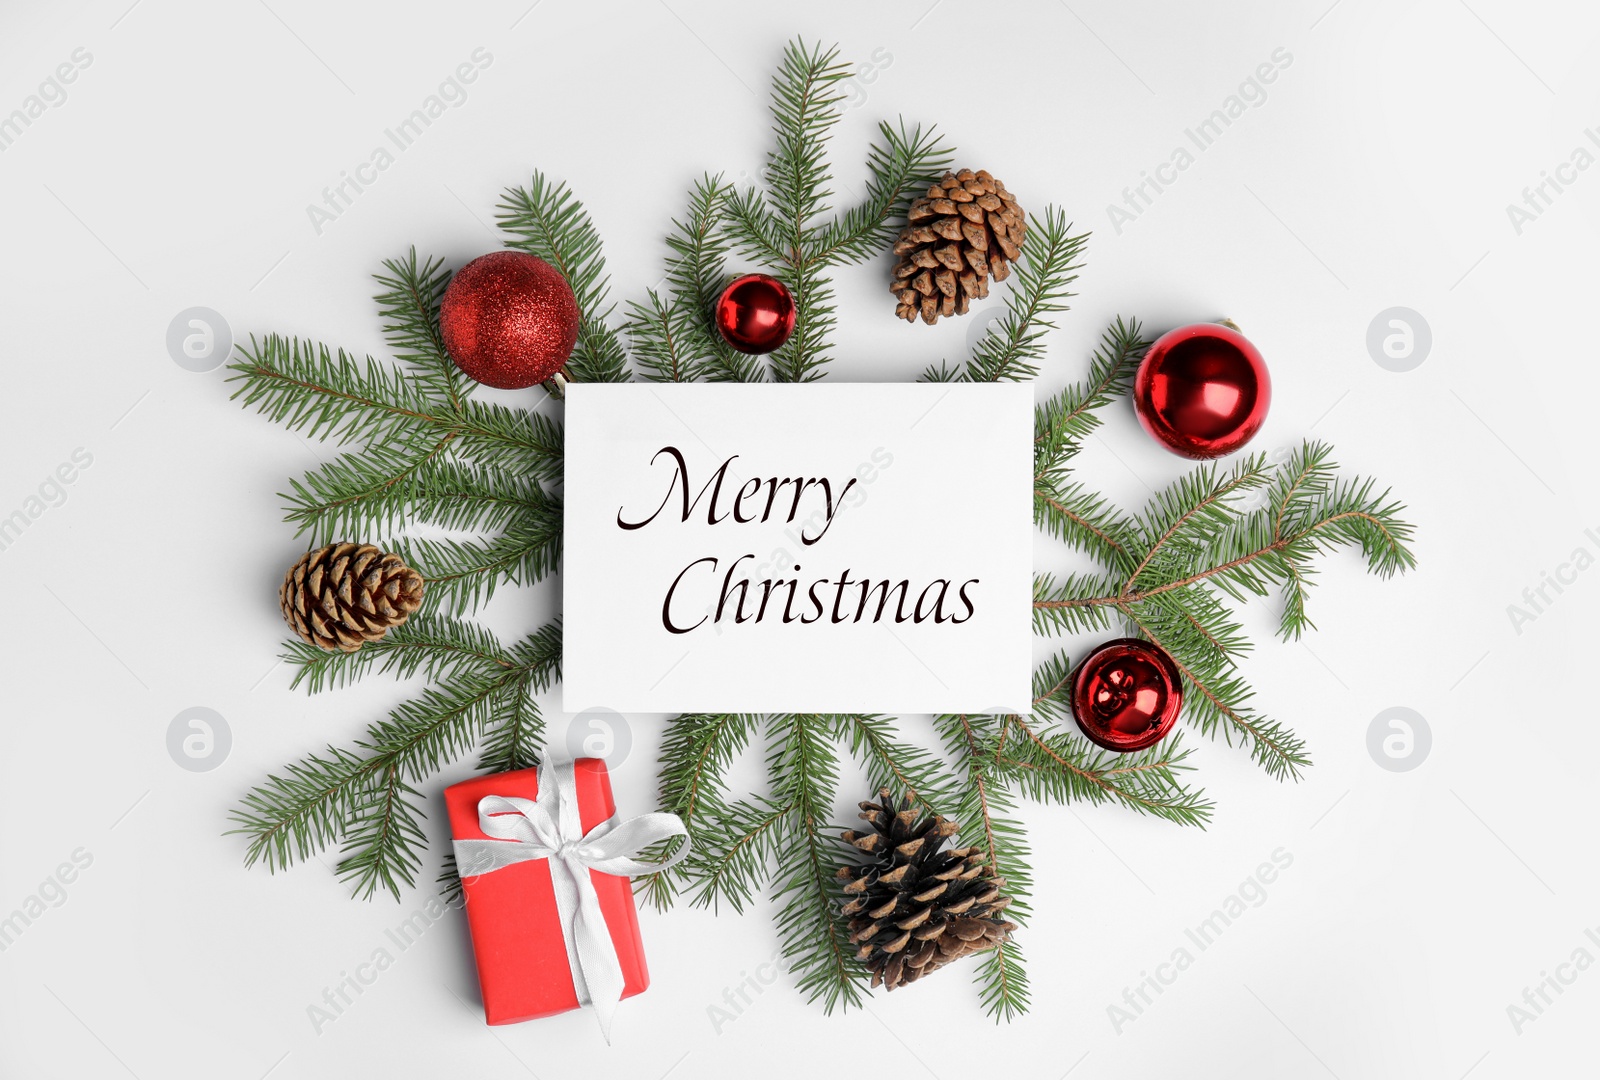 Image of Greeting card with phrase Merry Christmas, gift box, fir tree branches and beautiful festive decor on white background, flat lay